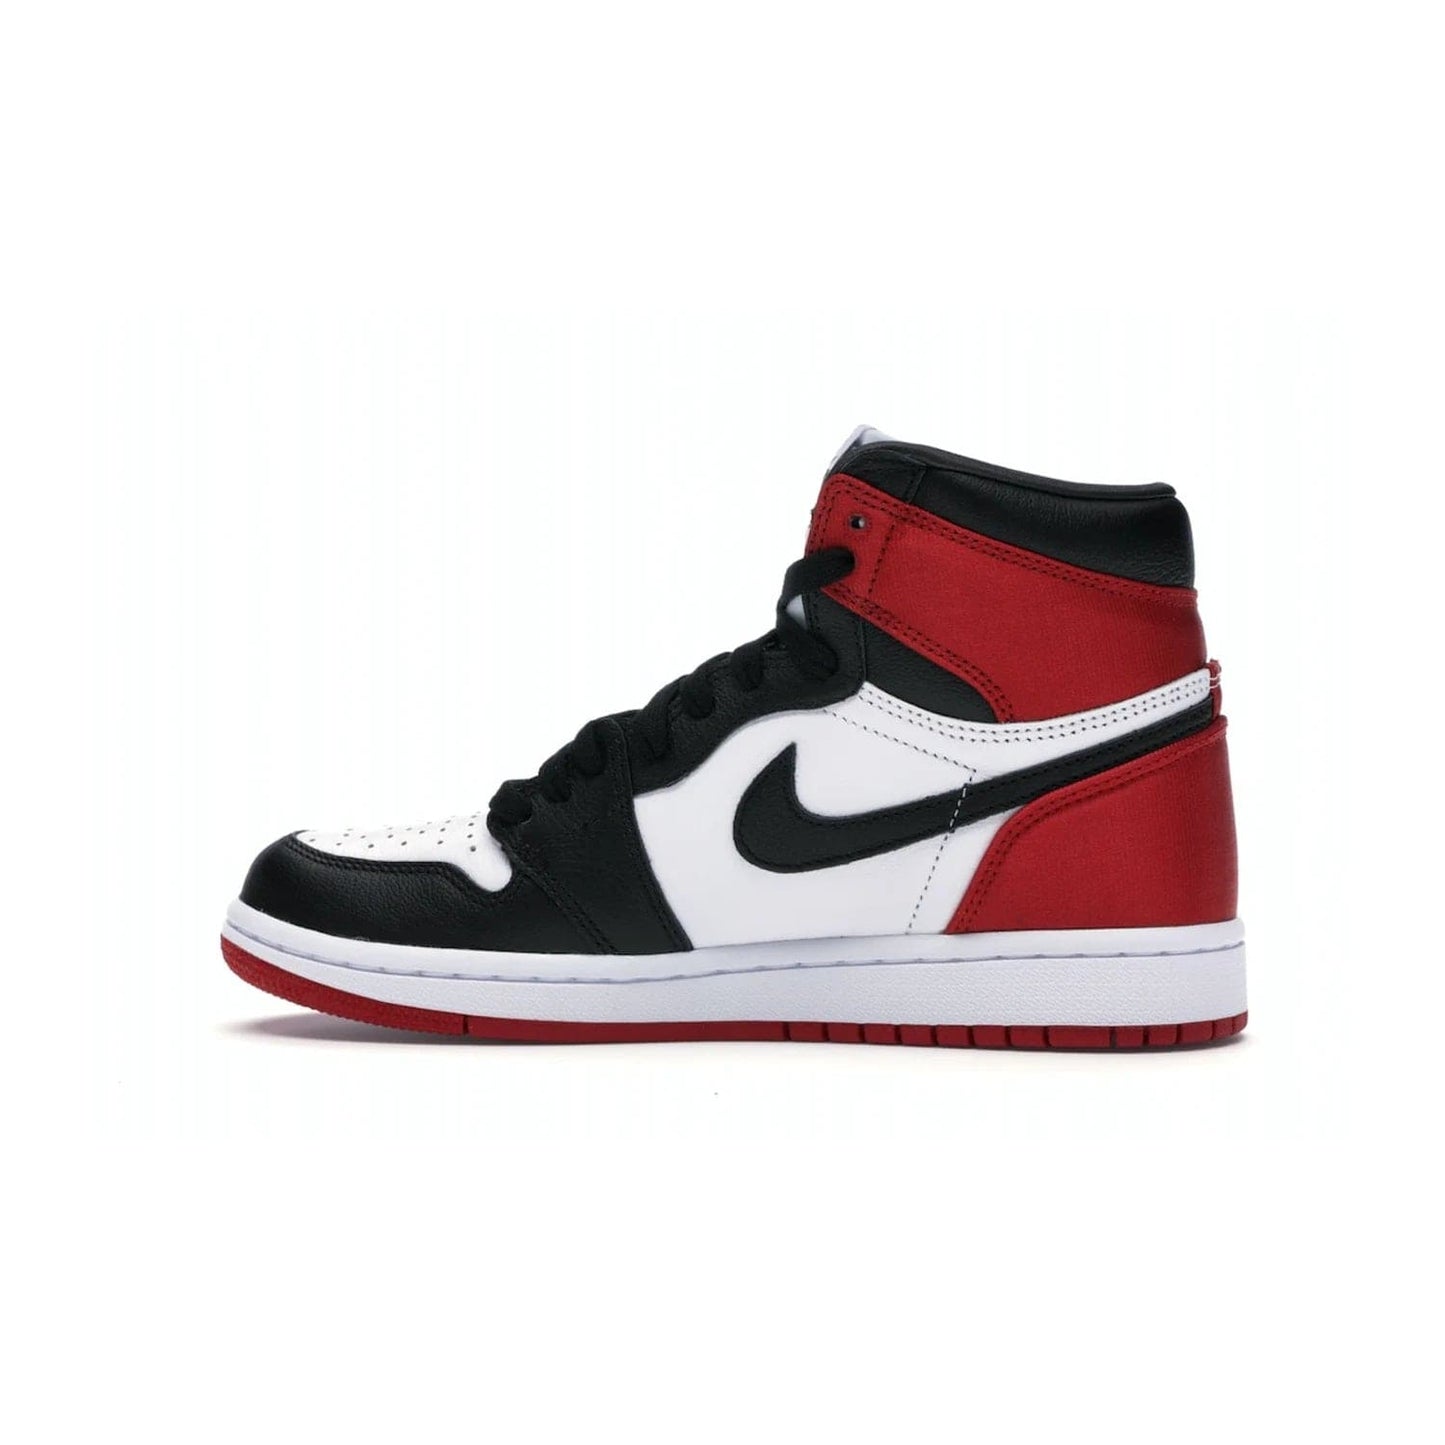 Jordan 1 Retro High Satin Black Toe (Women's) - Image 20 - Only at www.BallersClubKickz.com - Luxurious take on the timeless Air Jordan 1. Features a mix of black leather and satin materials with subtle University Red accents. Elevated look with metal Wings logo on the heel. Released in August 2019.